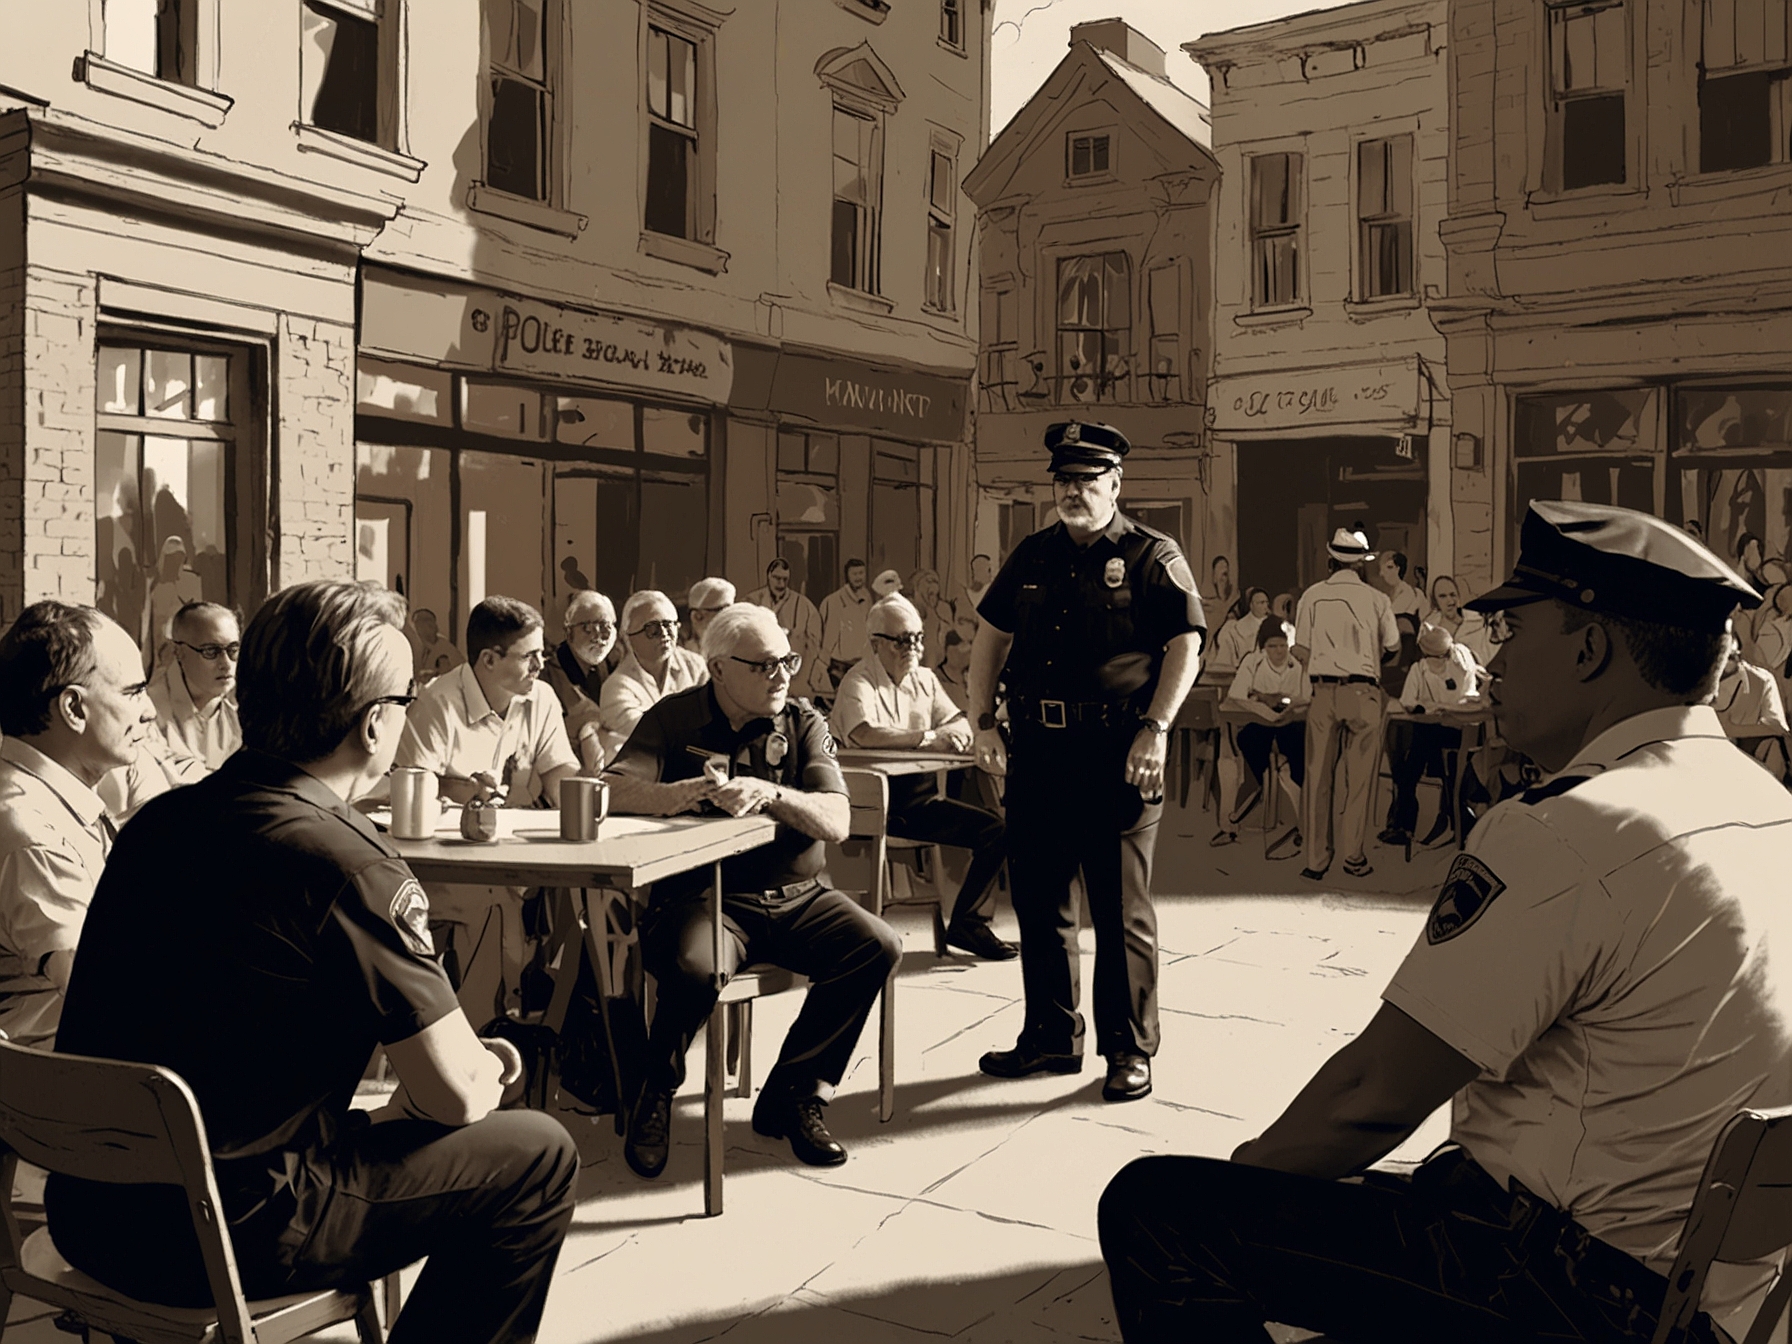 A community meeting in Old Town where residents interact with the new police chief.